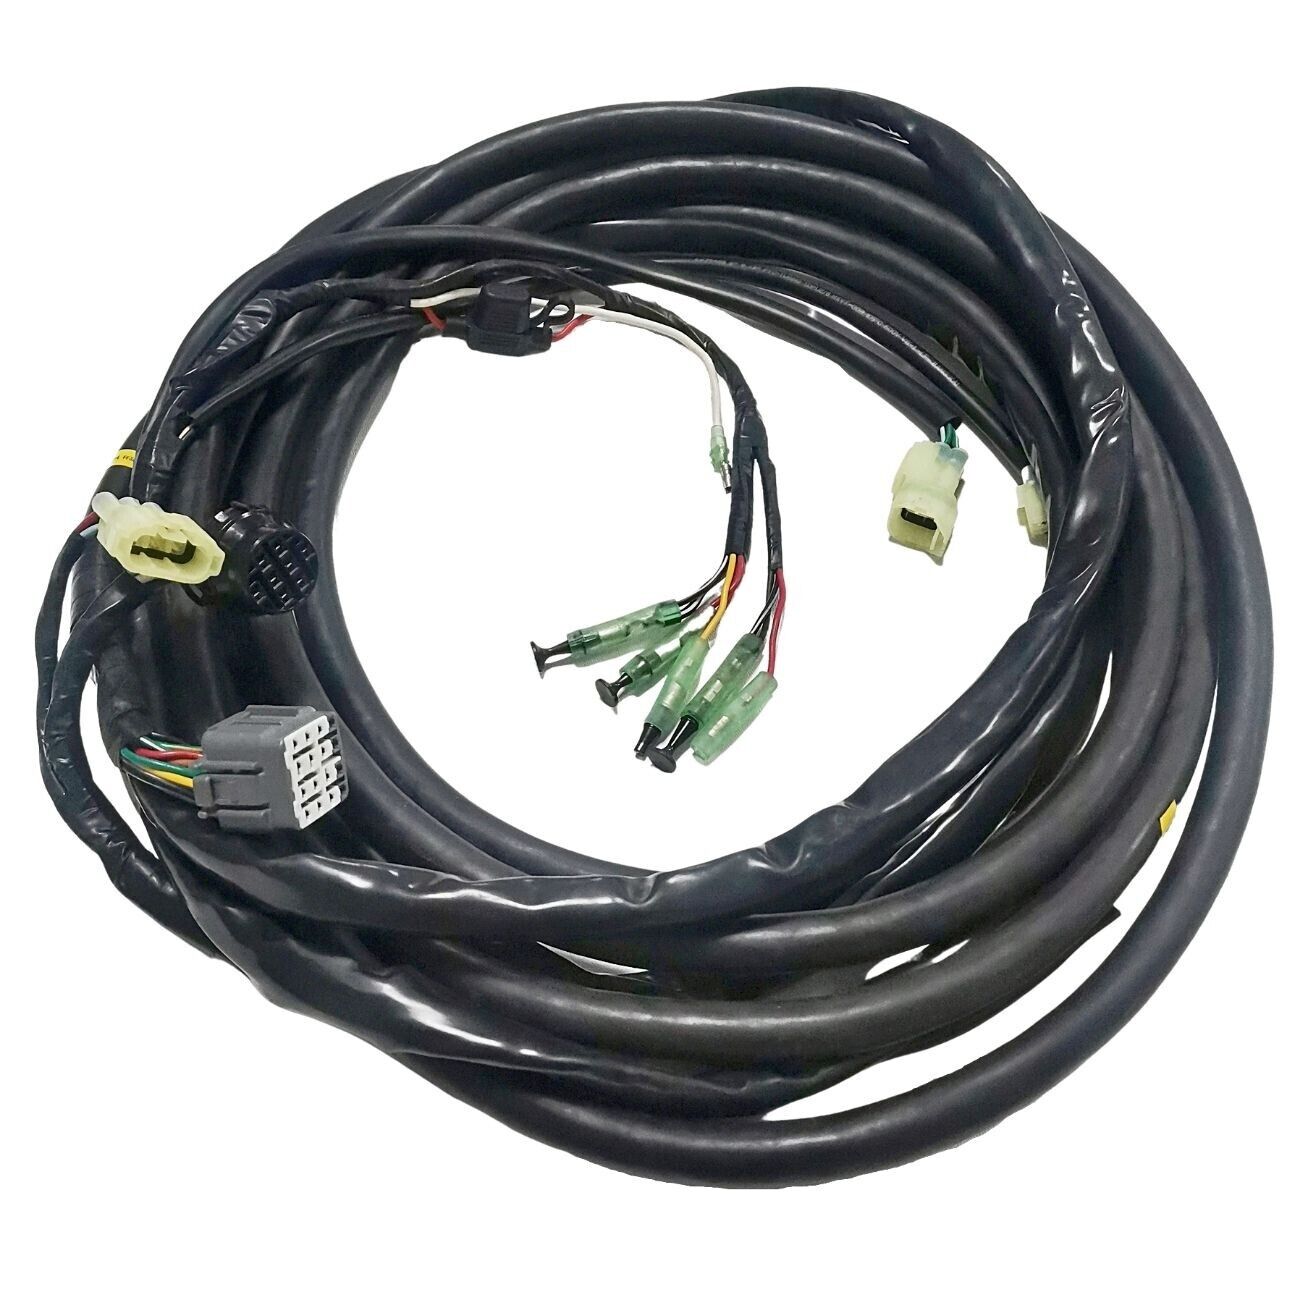 36620-93J02 For Suzuki Outboard Control Main Wiring Harness 16Pins 26FT Length